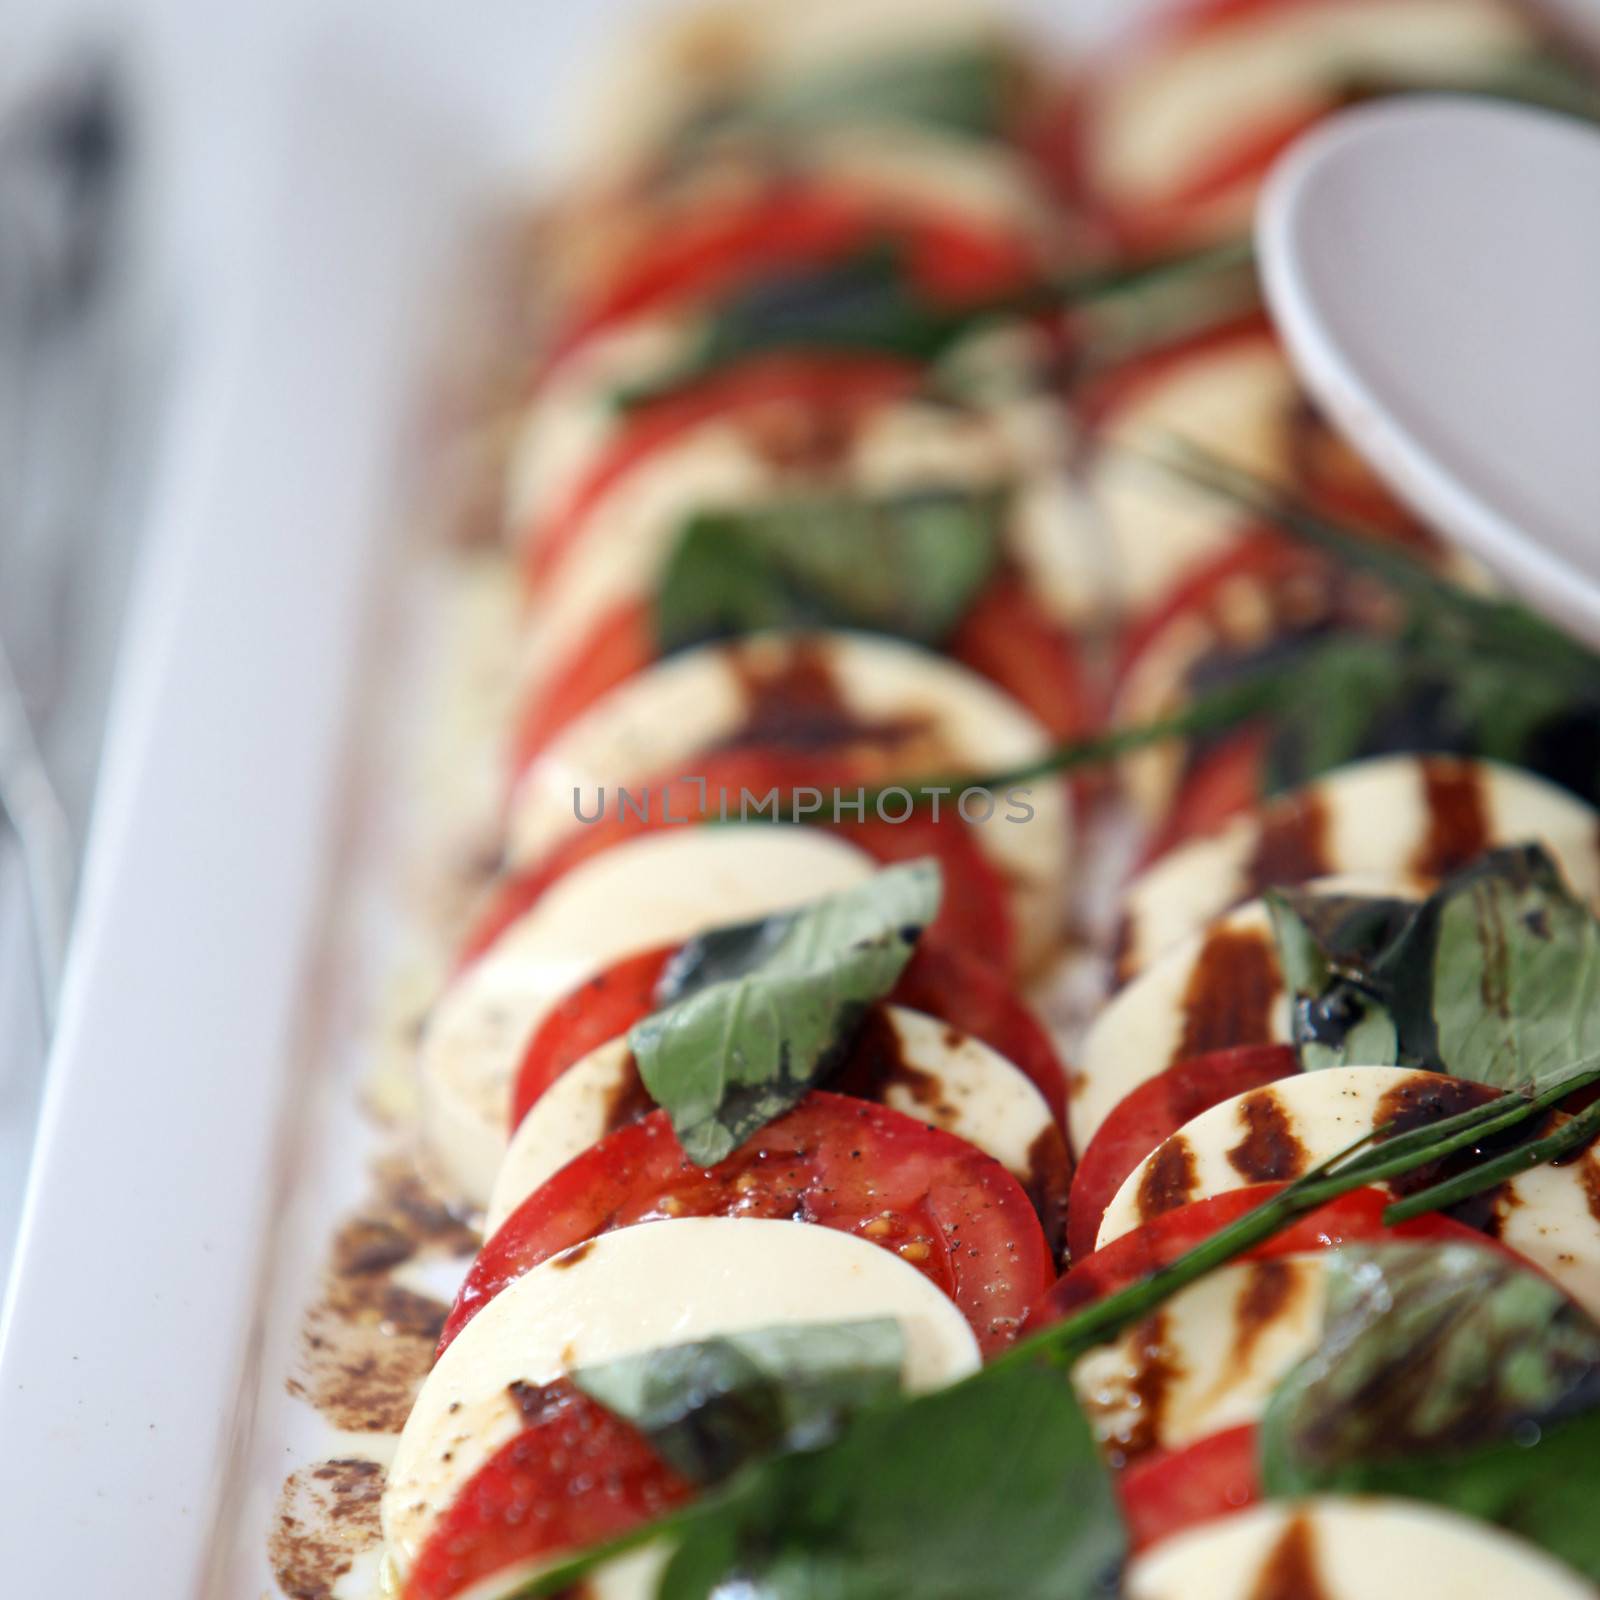 Display of mozzarella cheese and fresh sliced tomato in an alternating pattern on a buffet tray topped with fresh green herbs, close up view with shallow dof